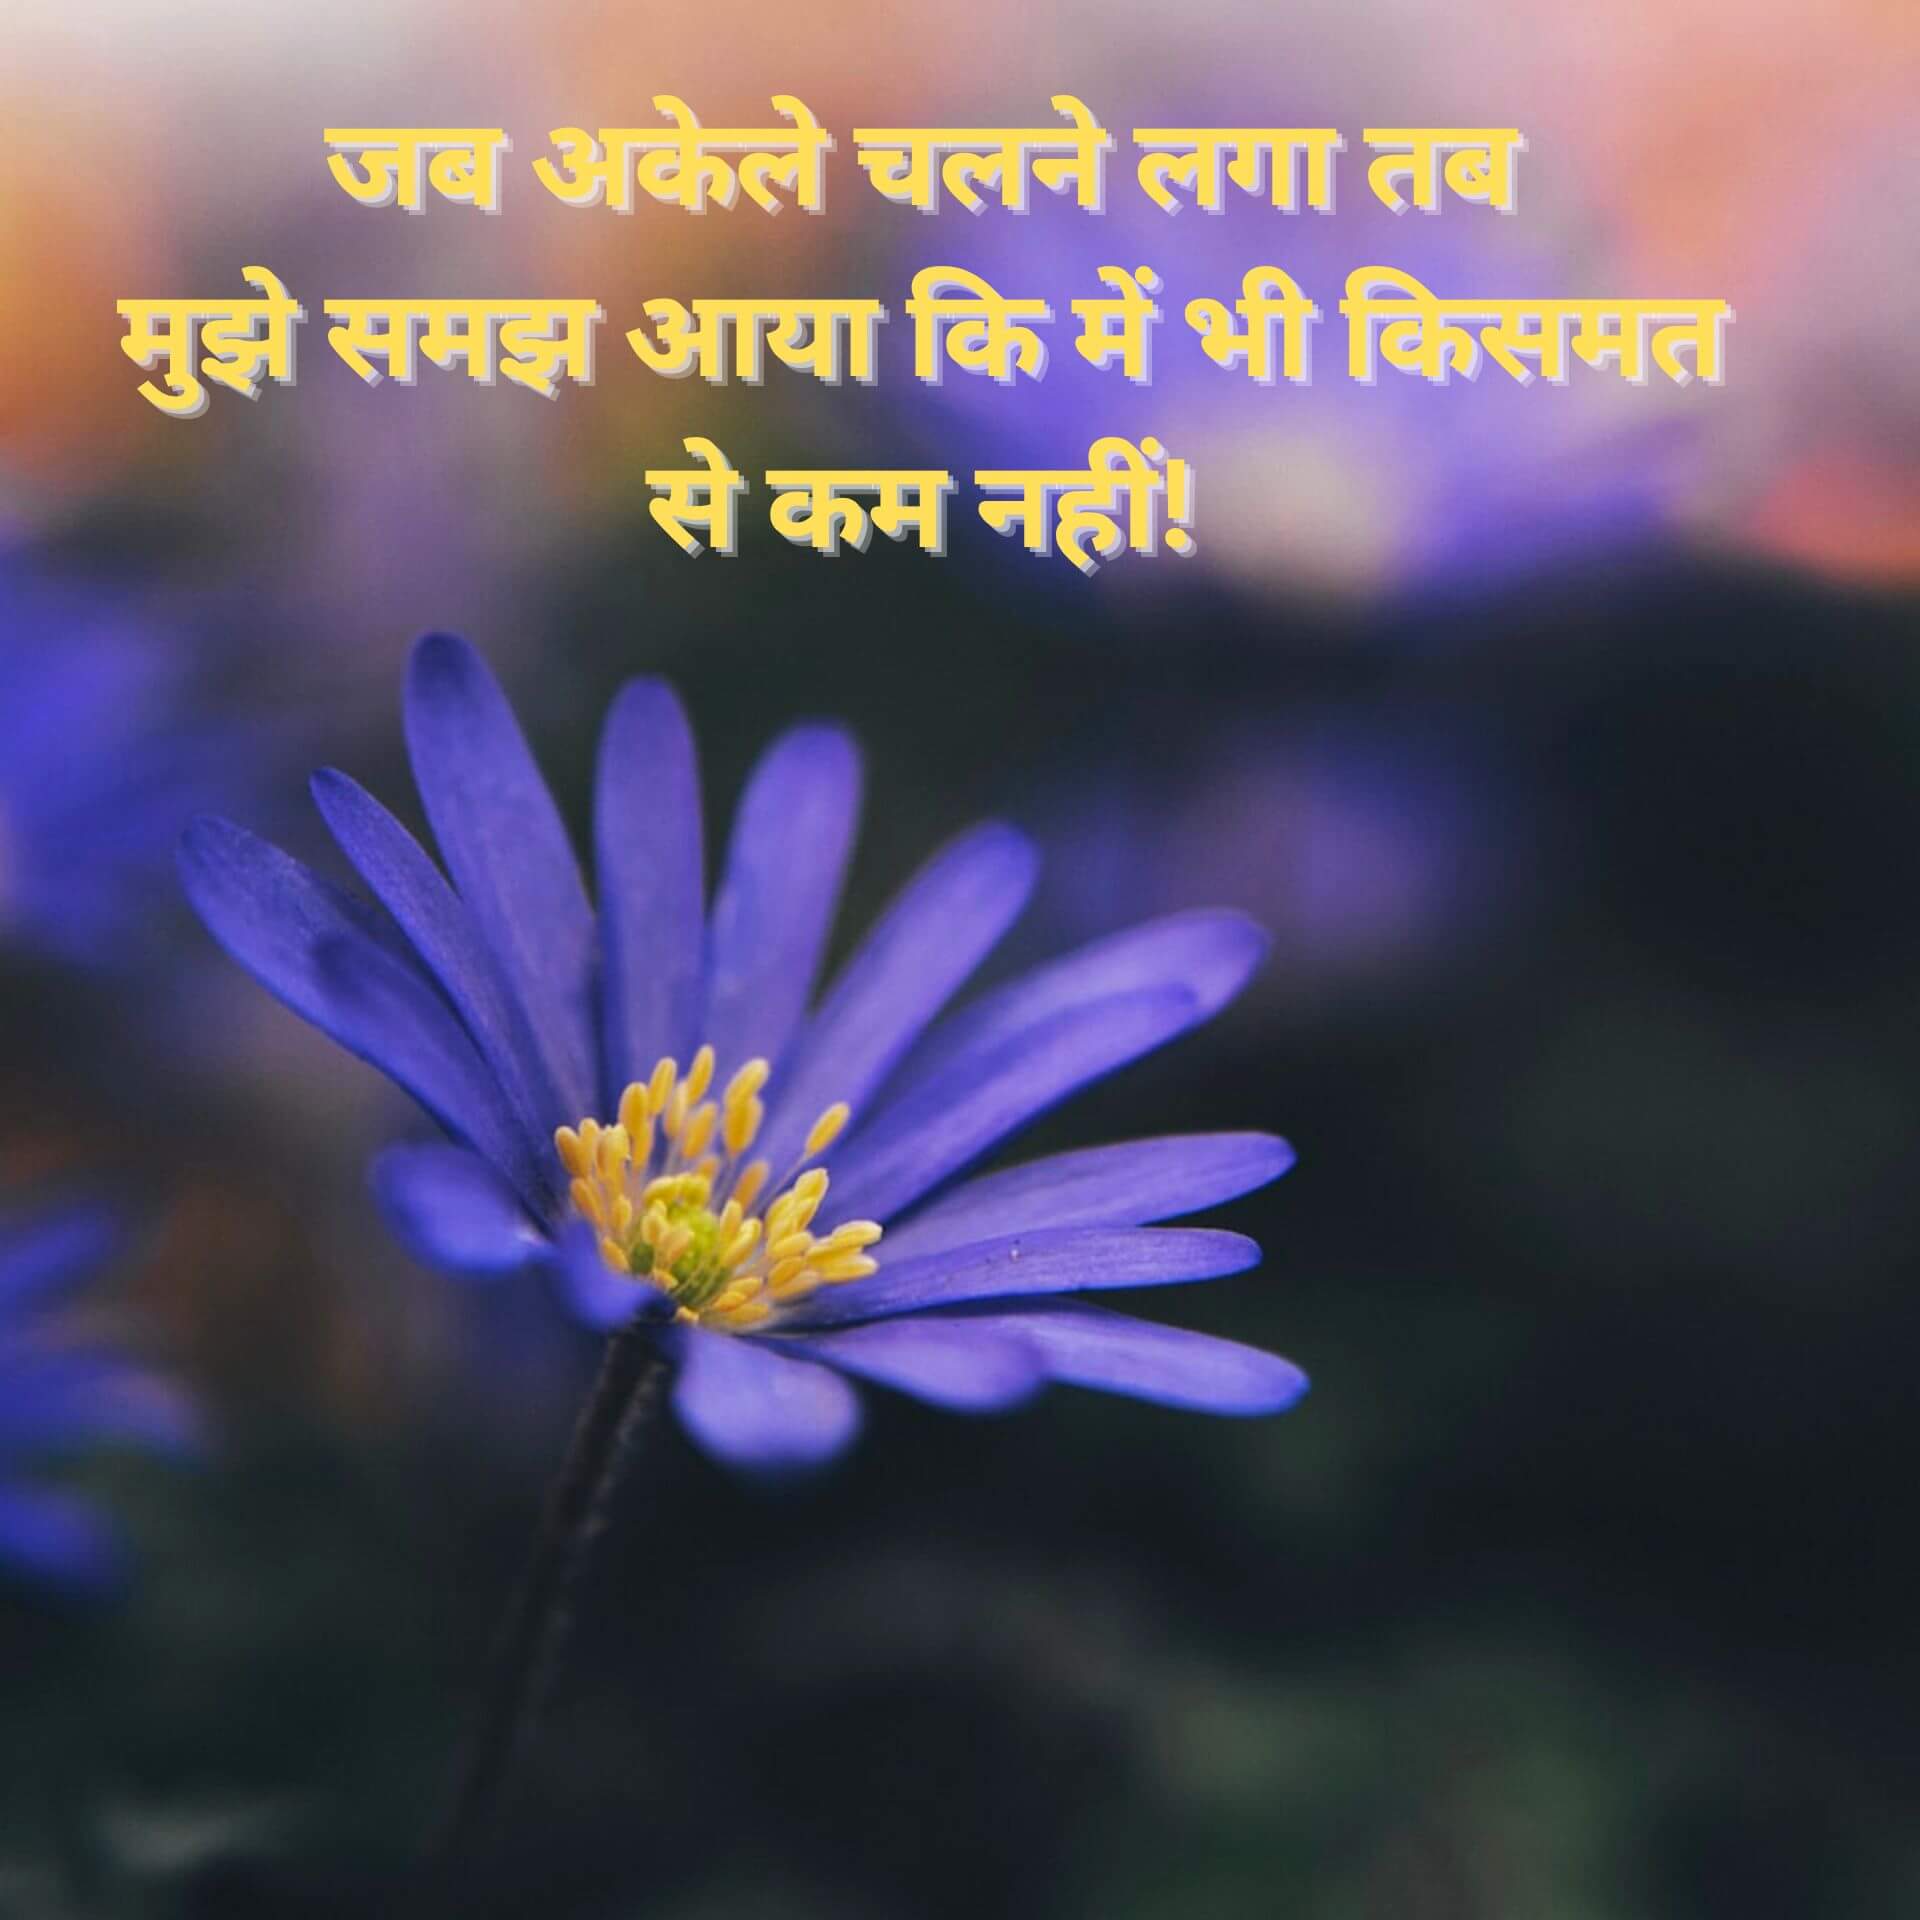 Hindi Motivational Quotes Pics Download for Whatsapp Download